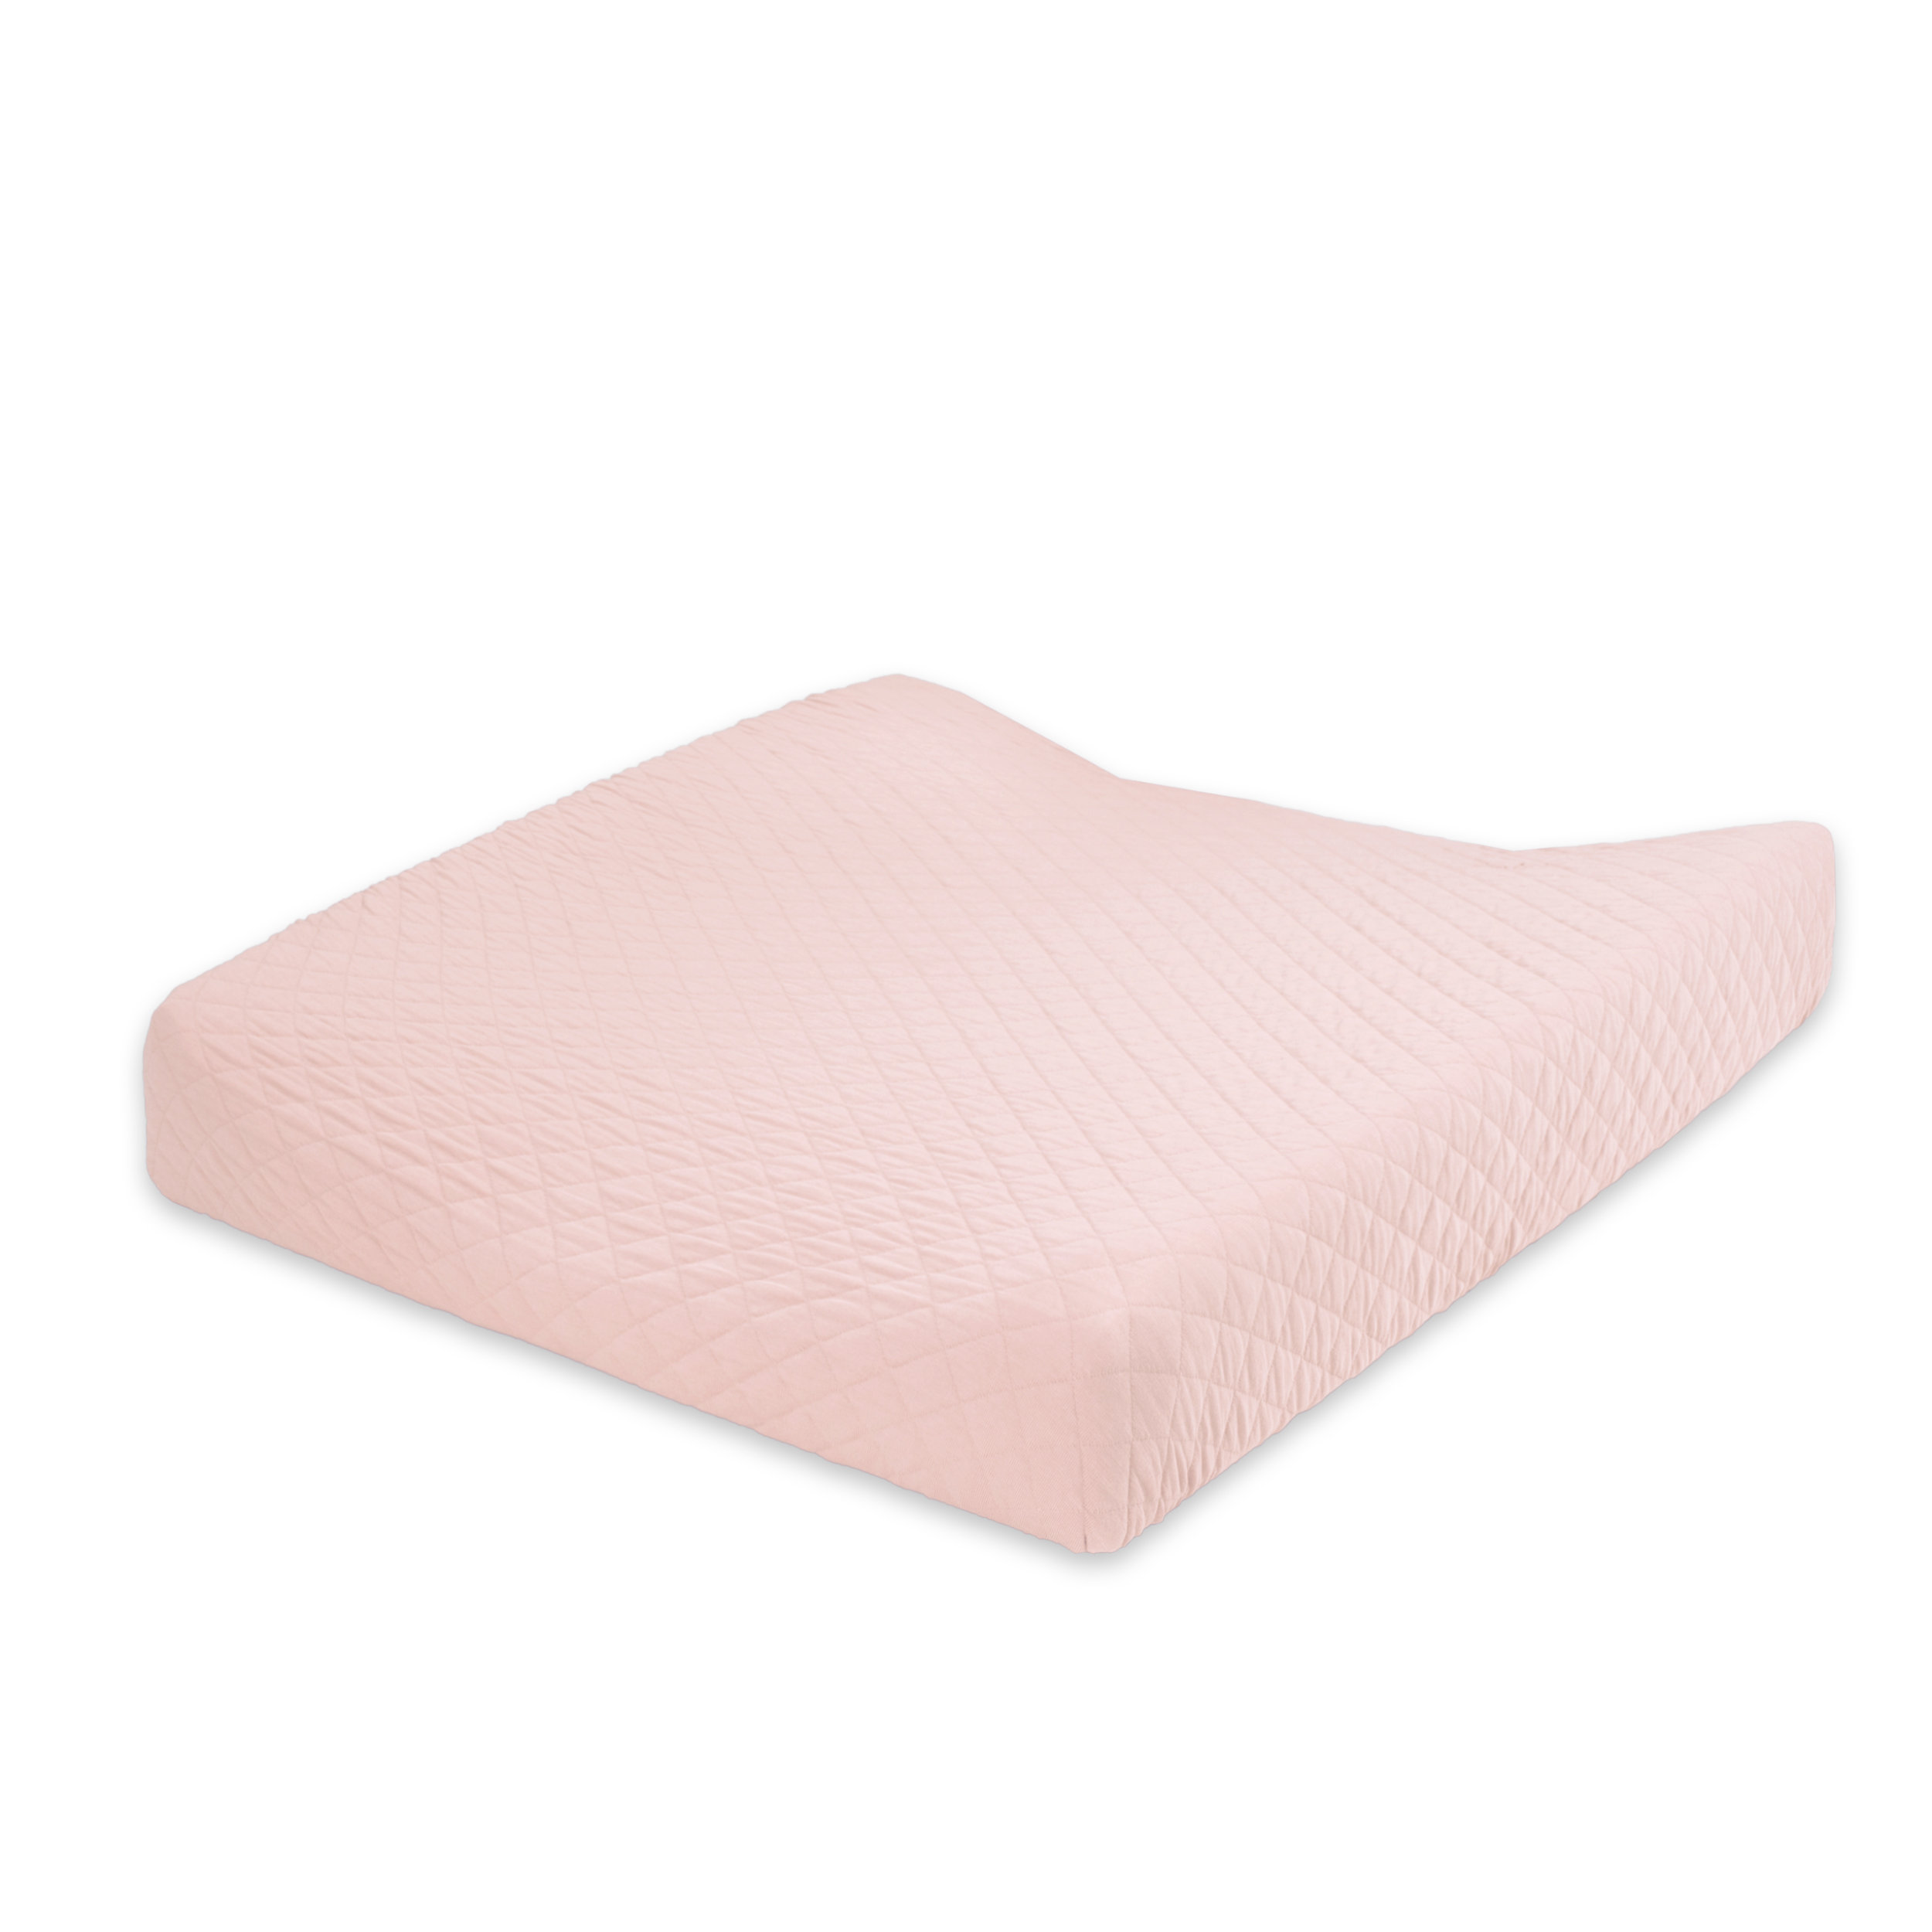 Funda protector cambiador Pady quilted jersey 50x75cm QUILT Blush